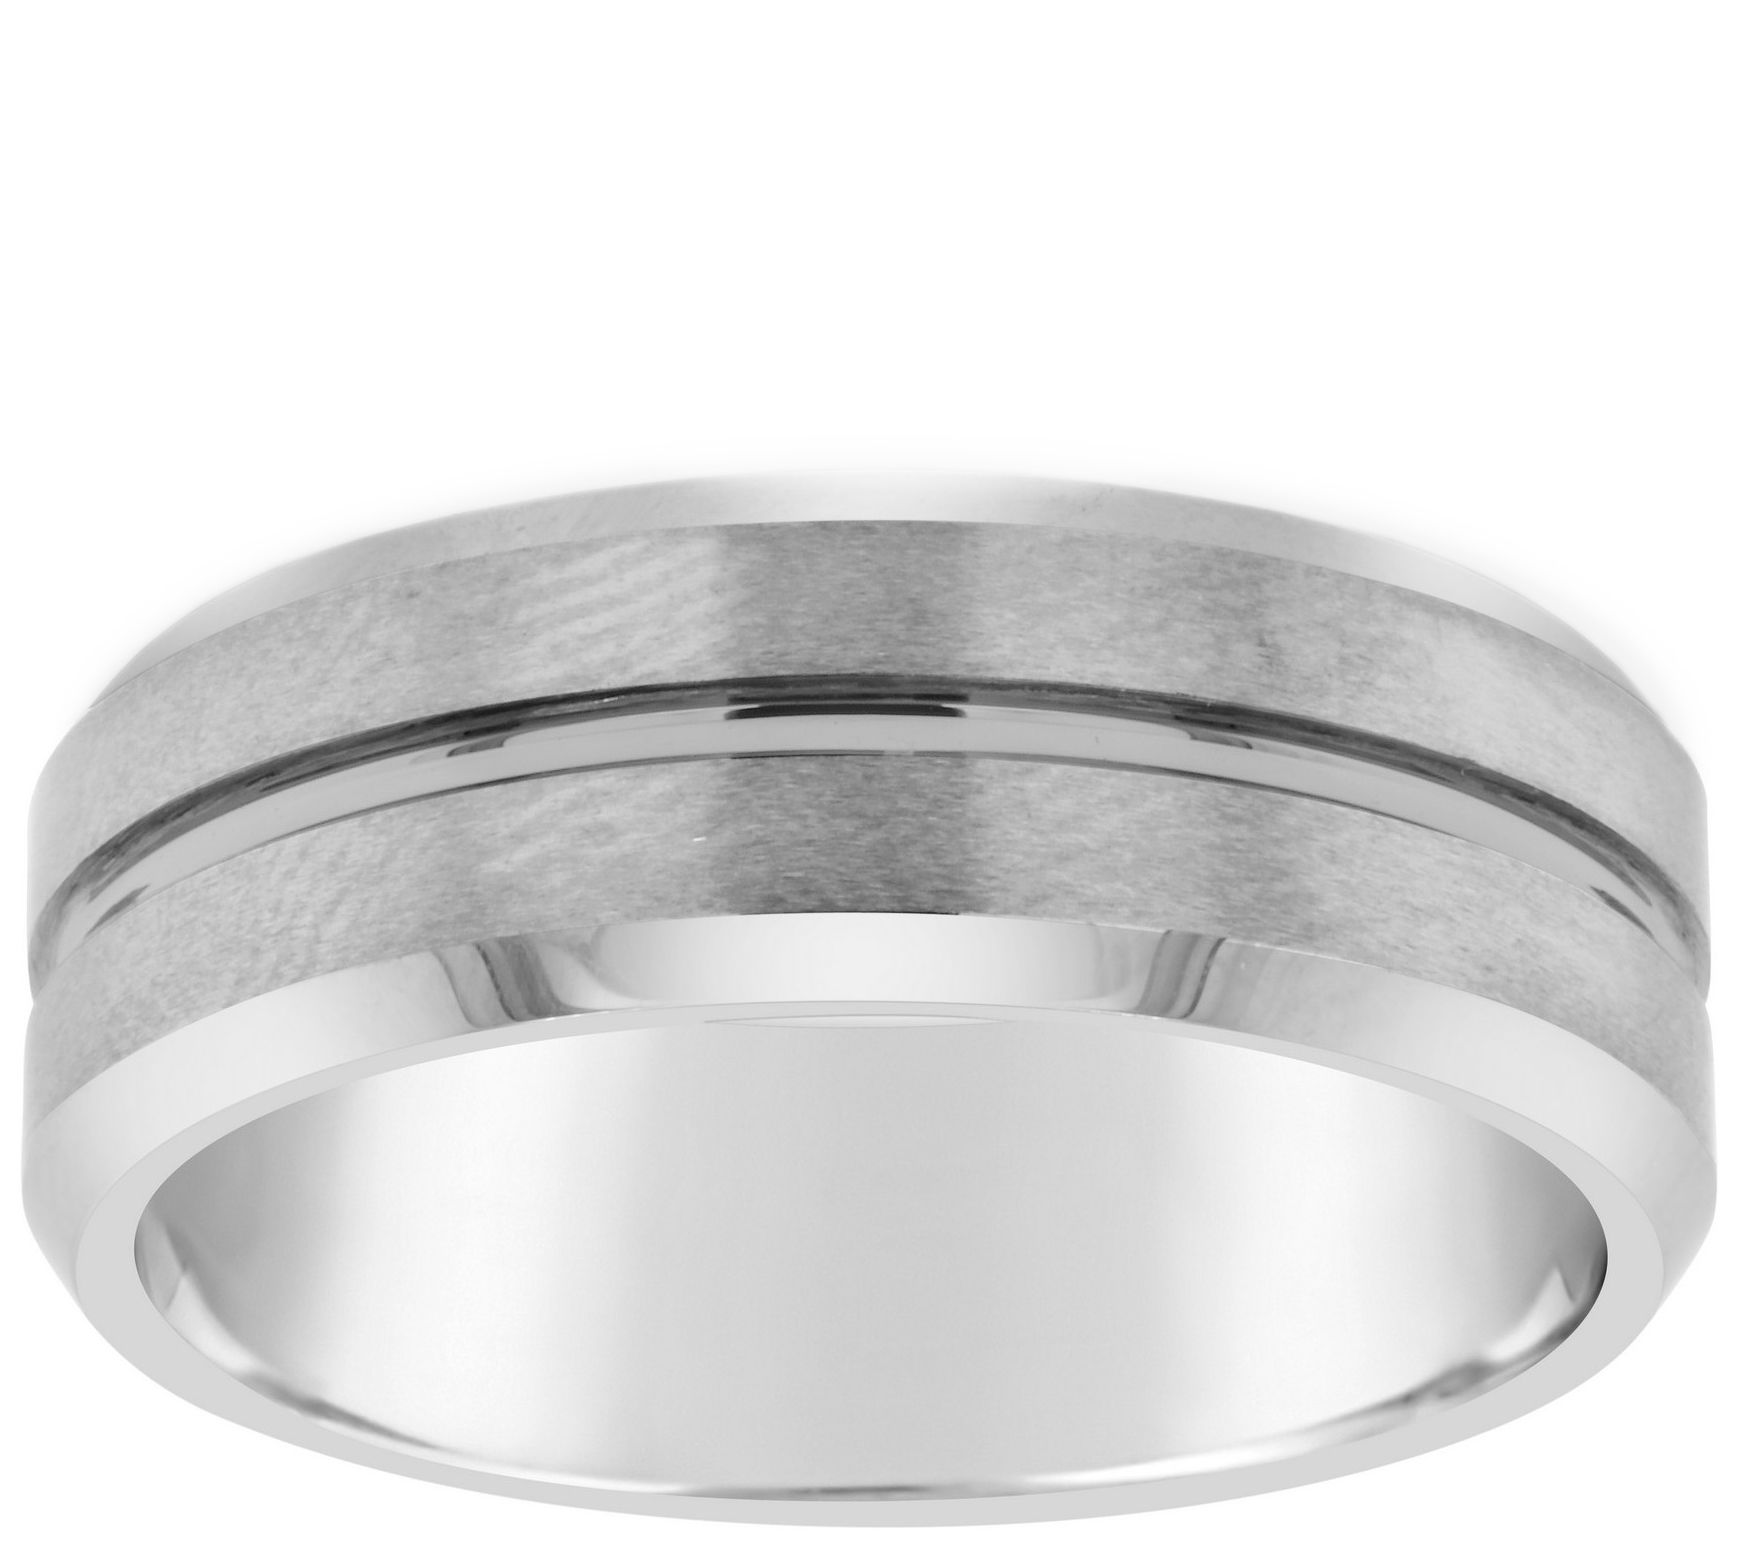 Men's Grooved 8mm Brushed Finish Tungsten Wedding Band - QVC.com